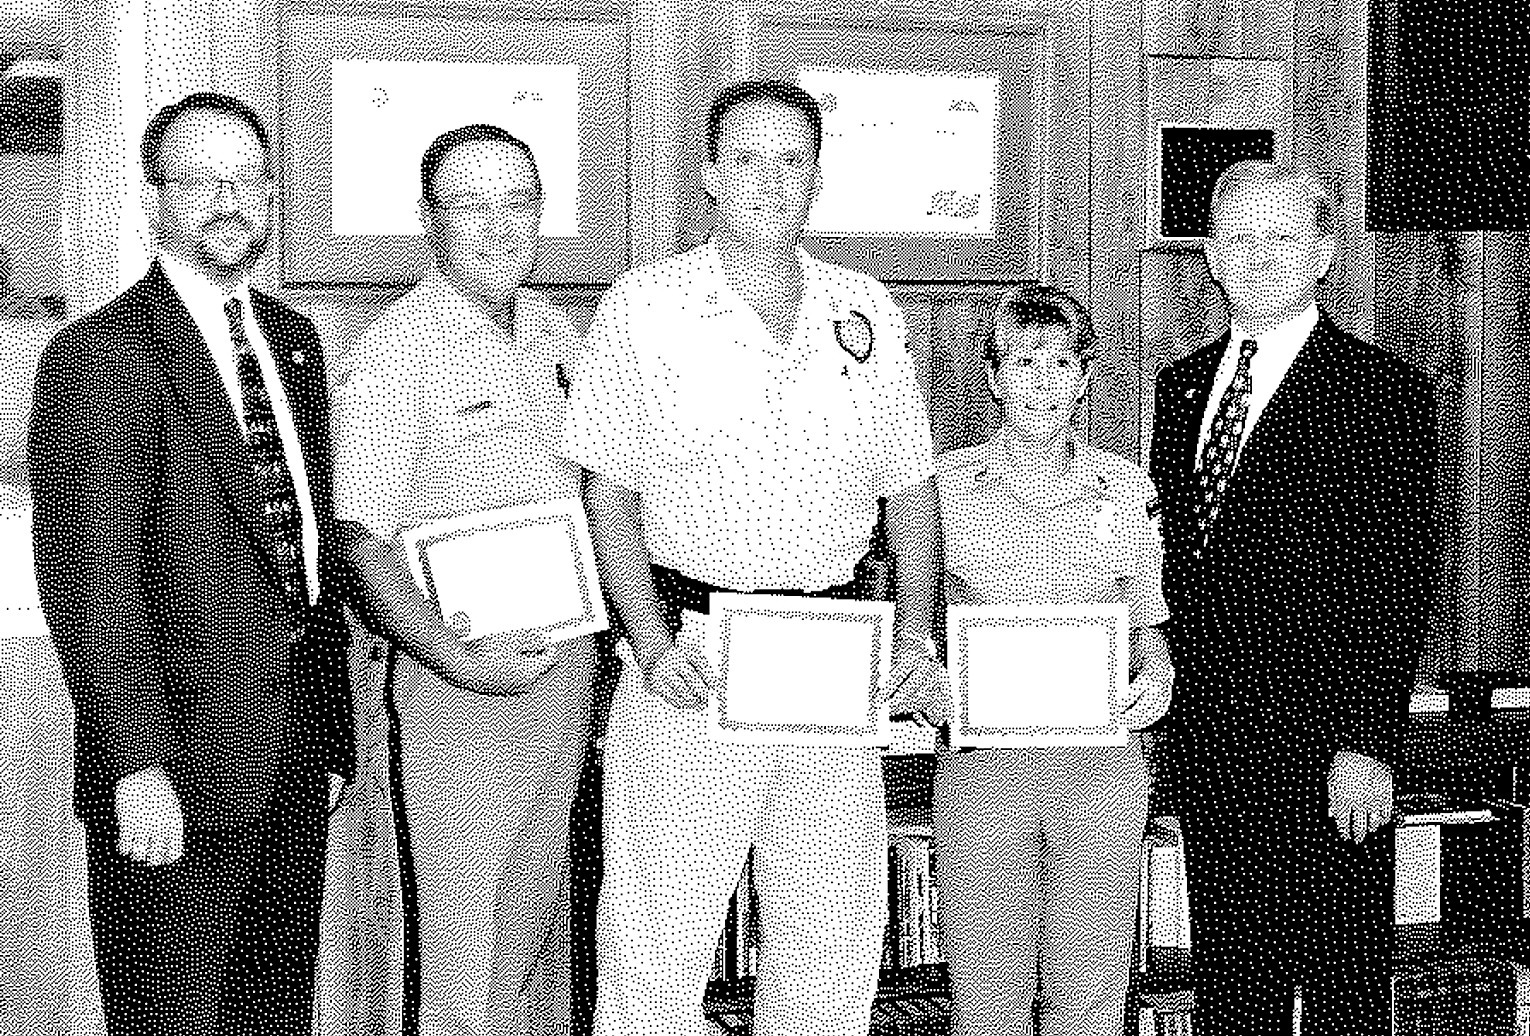 IN THE SUMMER OF 1997 the Branch of the Norton Correctional Facility was recognized. Present for the awards ceremony were (from left) warden Jay Shelton; Tom Norris who was promoted to COII; Rick Bice who was promoted to COII; Jill Emery who was promoted to CSI; and Secretary of Corrections Charles Simmons.